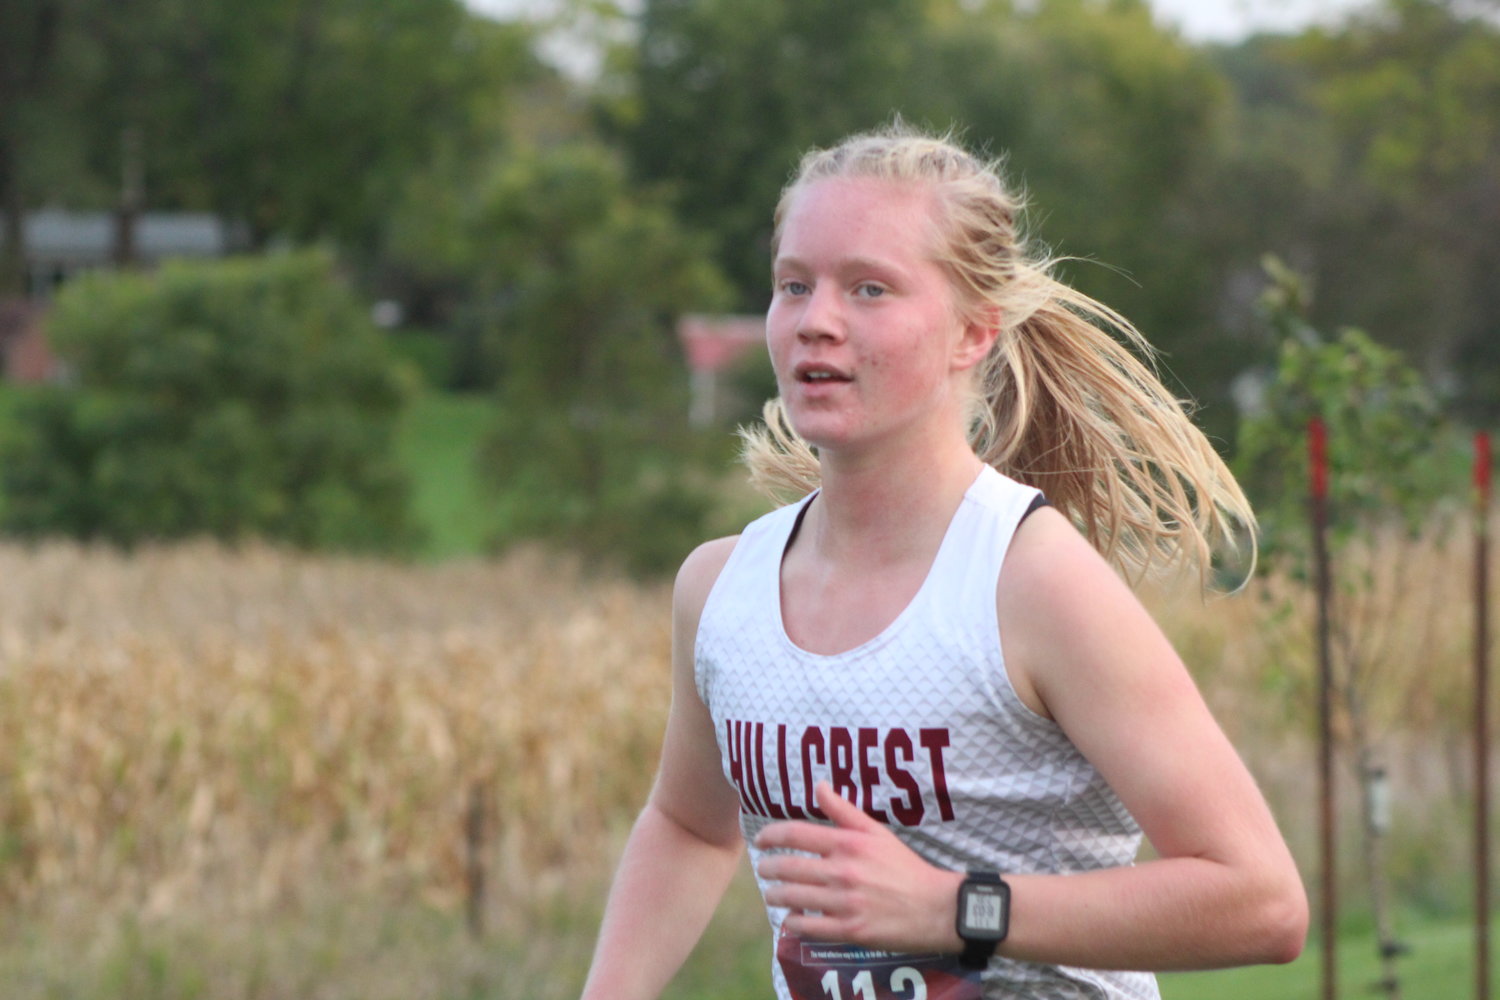 Leah Bontrager of Hillcrest Academy finished 26th with a time of 22:30.